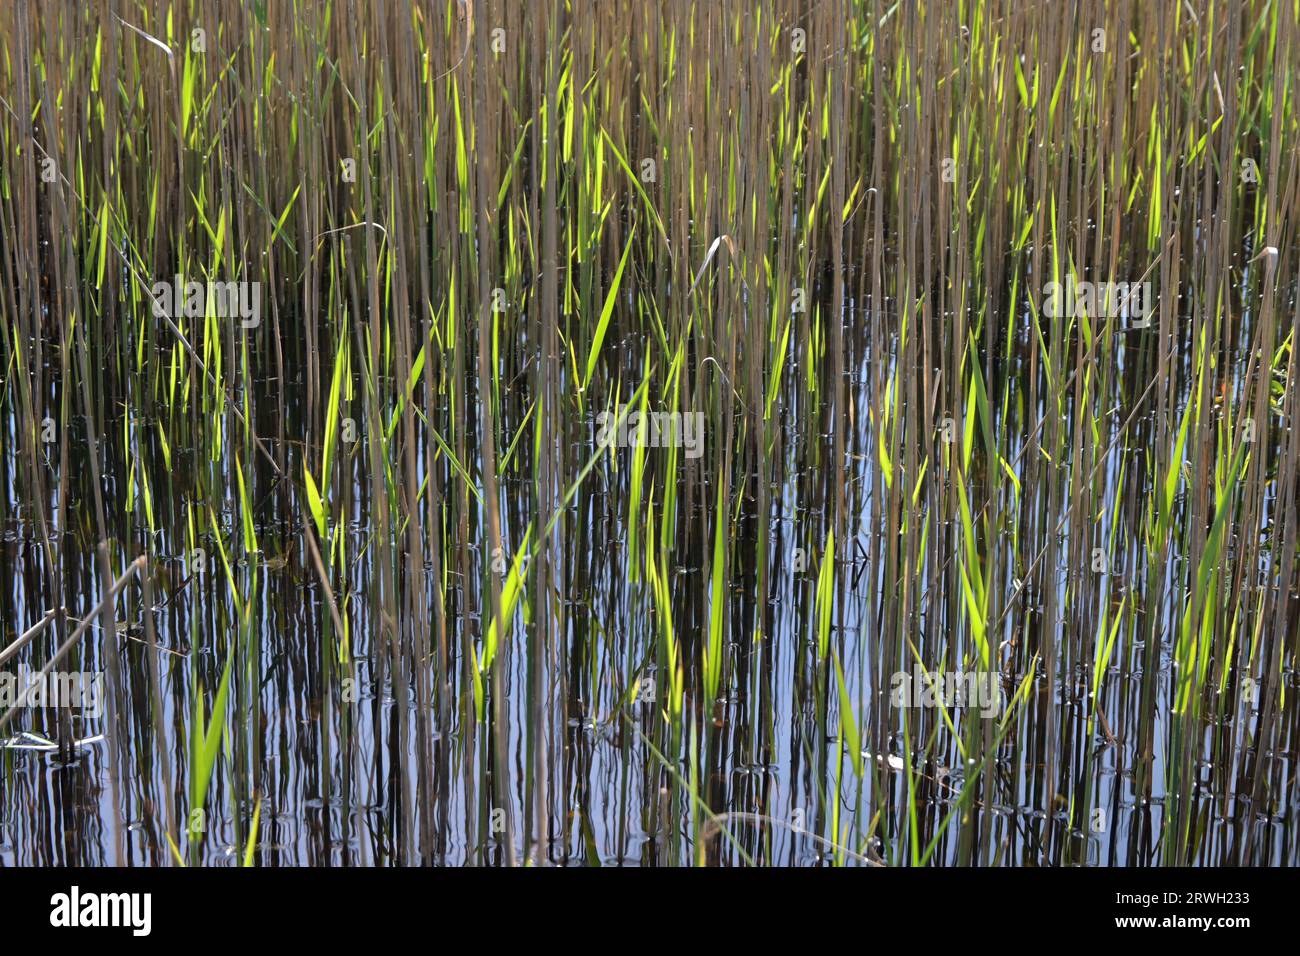 backlit reed plants Stock Photo